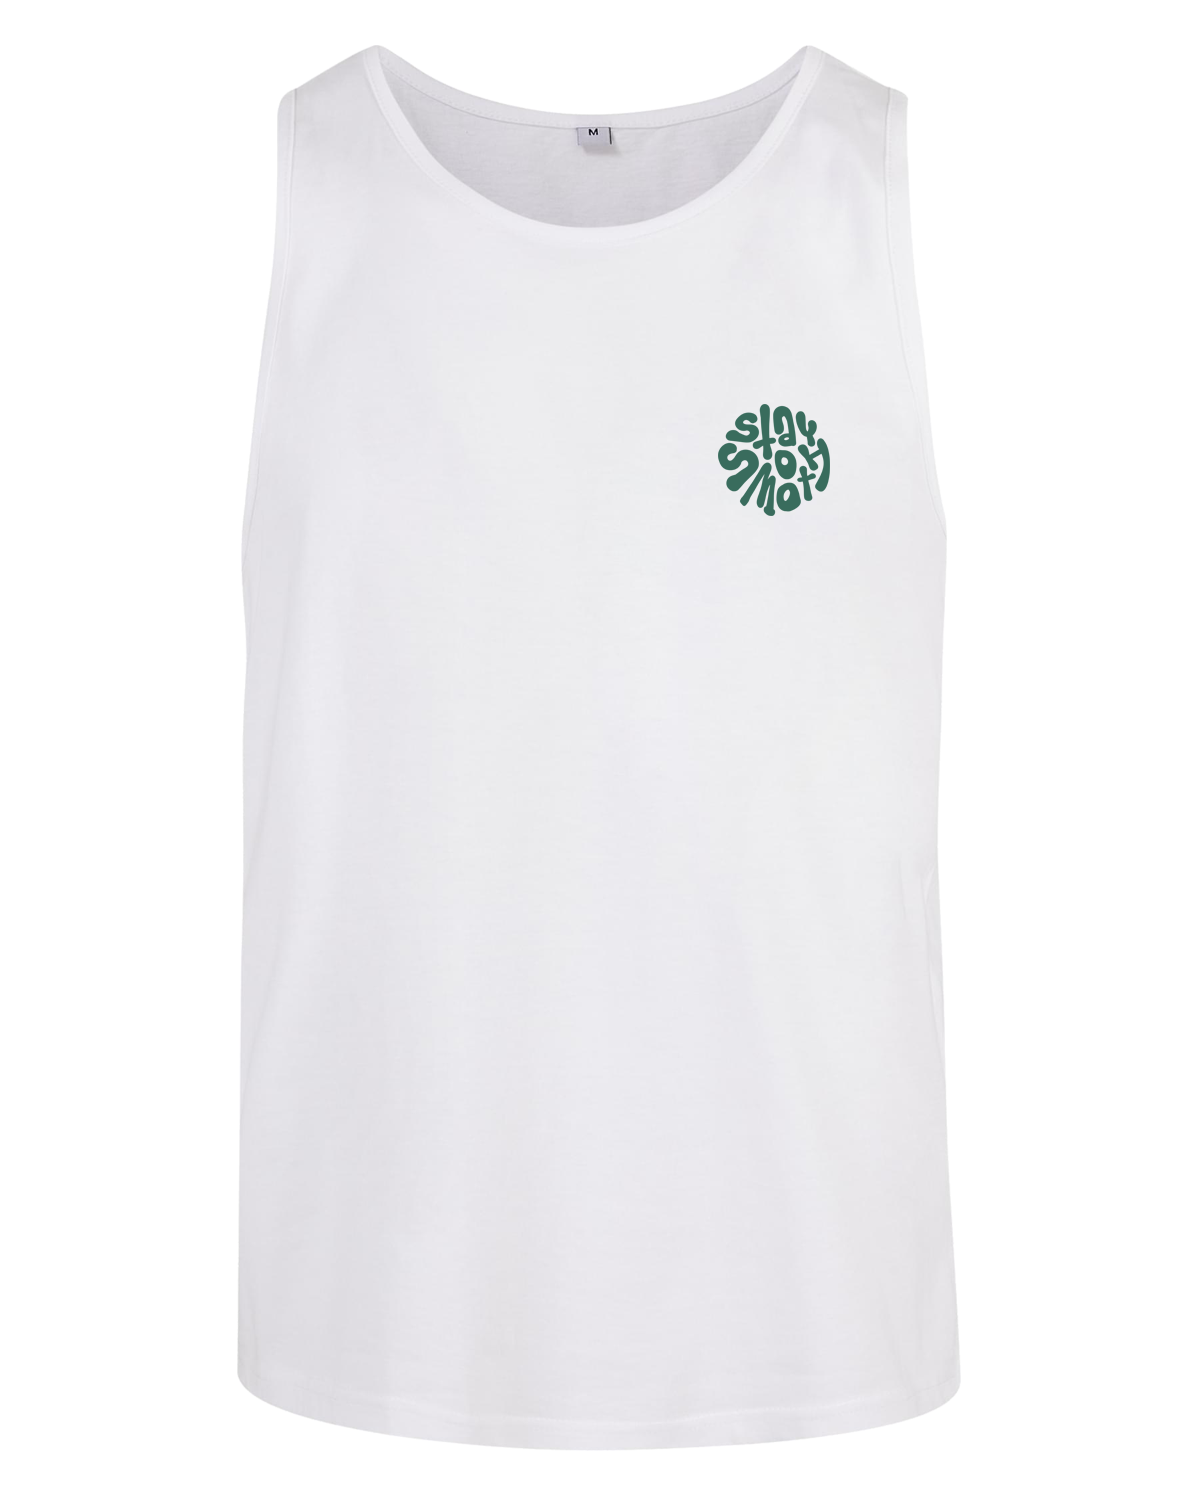 White Top / Stay Smooth Green Front